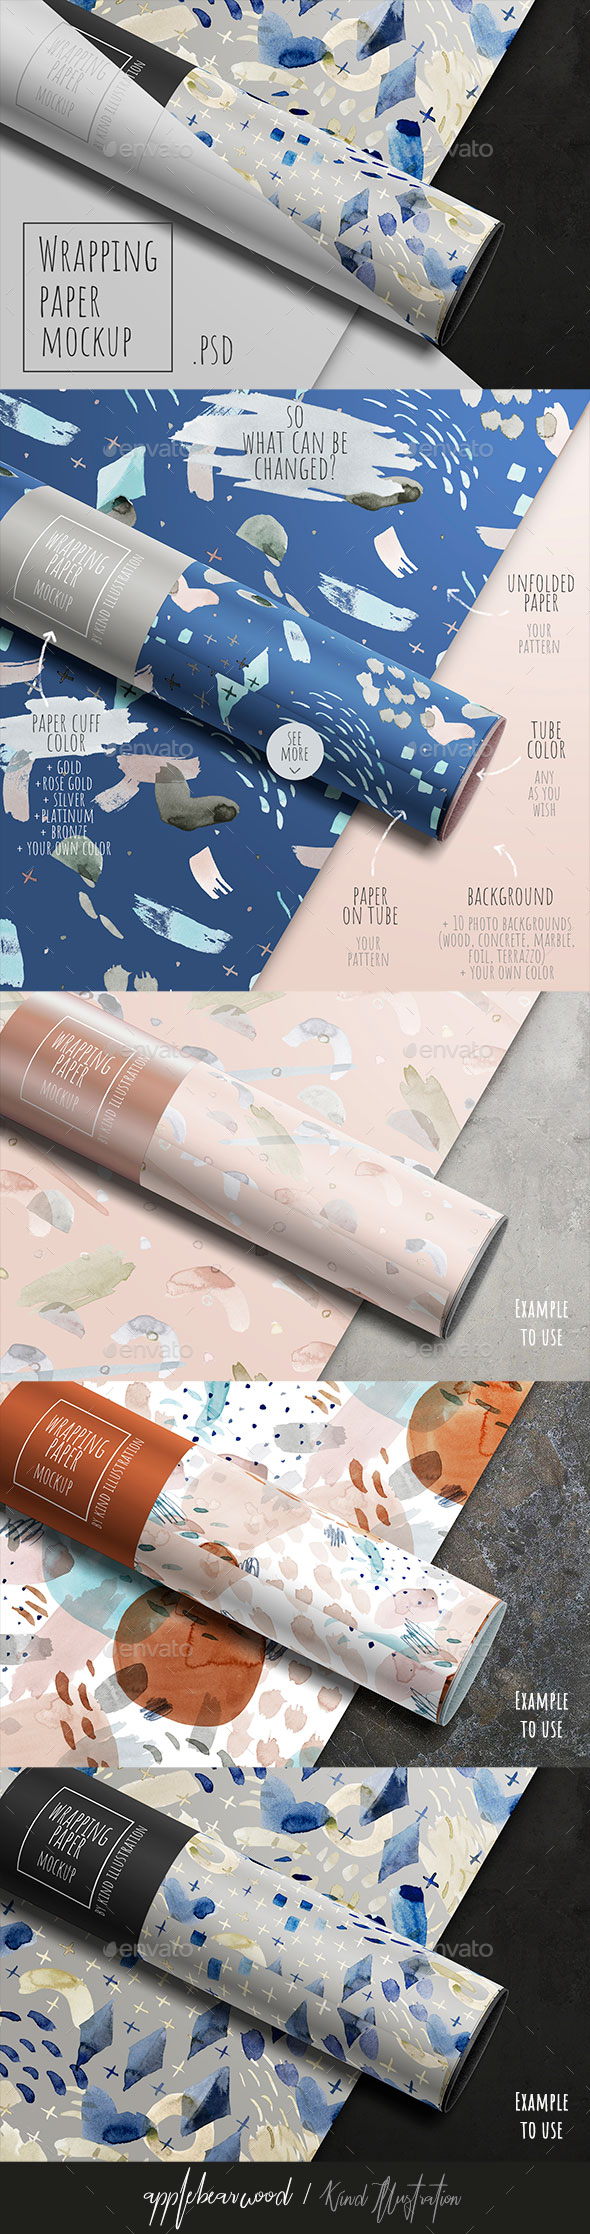 Download Paper Mockup Graphics Designs Templates From Graphicriver Yellowimages Mockups